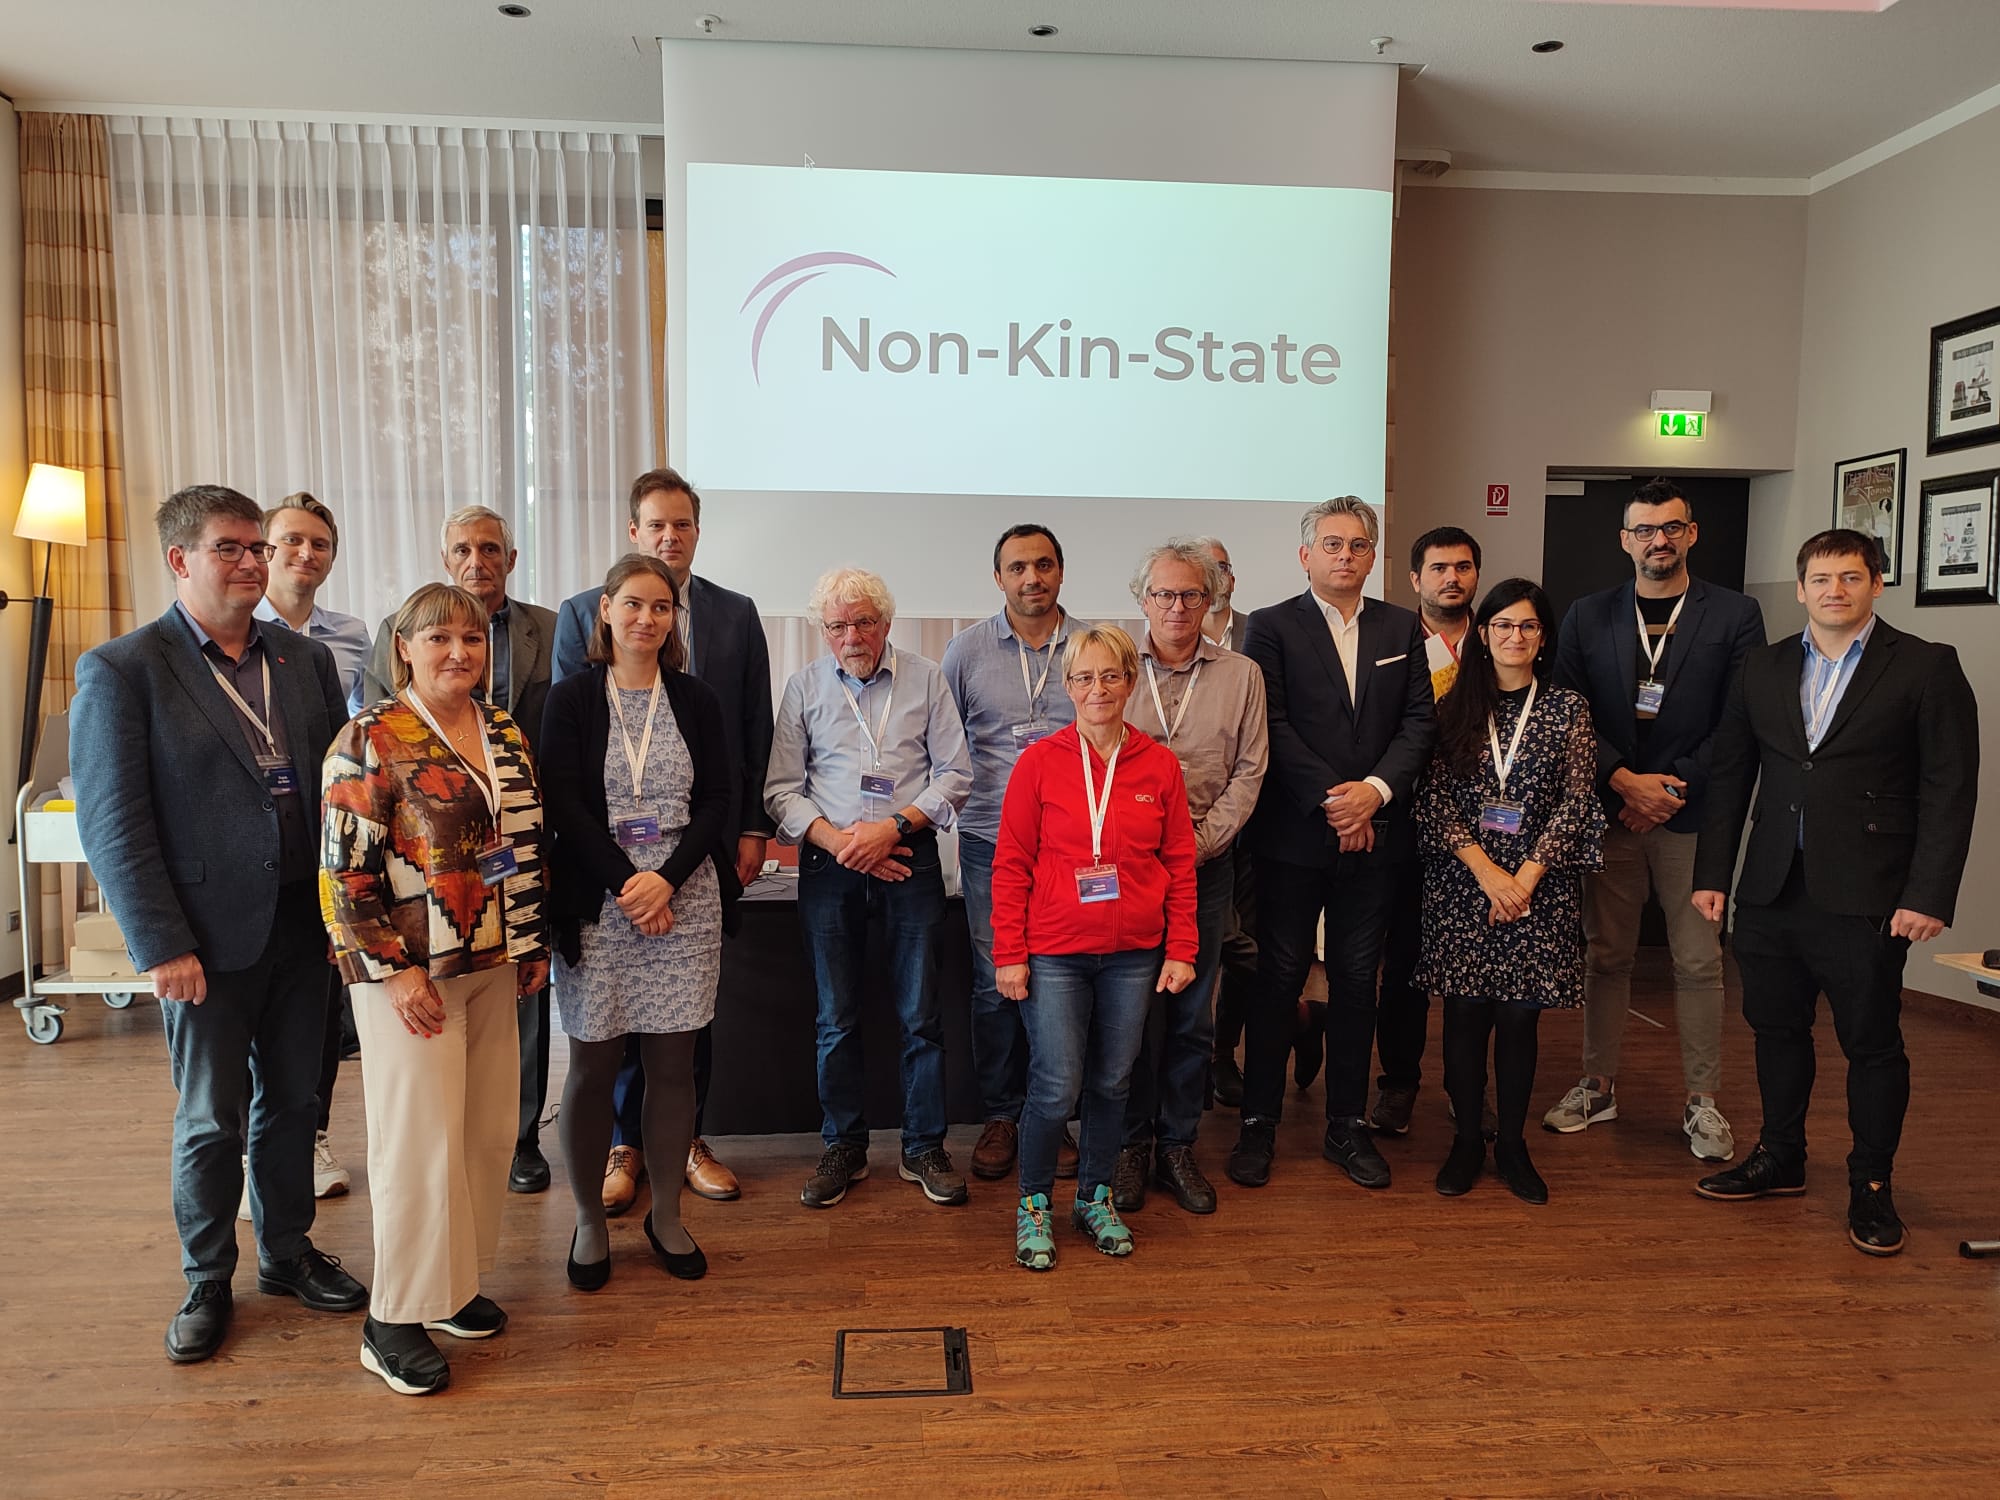 Meeting of the Non-Kin-State Working Group at the FUEN Congress in Berlin